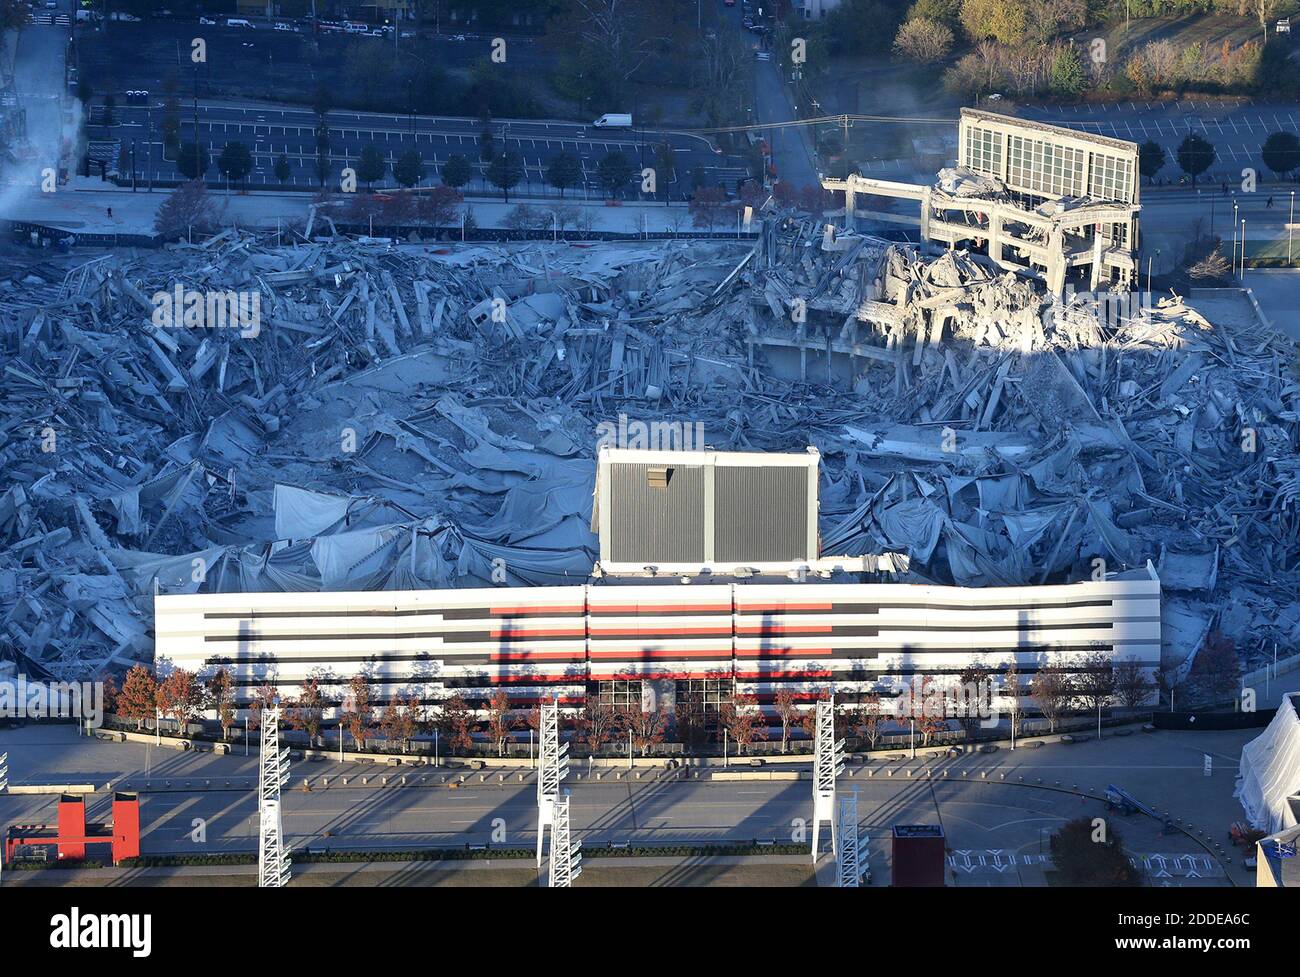 NO FILM, NO VIDEO, NO TV, NO DOCUMENTARY - The remains of the Georgia Dome after it was imploded next to Mercedes-Benz Stadium on Monday, November 20, 2017, in Atlanta, GA, USA. More than 300 pounds of explosives collapsed the steel in the upper ring and about 4,500 pounds of dynamite crumbled the concrete columns of the Atlanta institution of the last 25 years. When the dust cleared, two sections of the Georgia Dome's outside walls were still standing. Photo by Curtis Compton/Atlanta Journal-Constitution/TNS/ABACAPRESS.COM Stock Photo